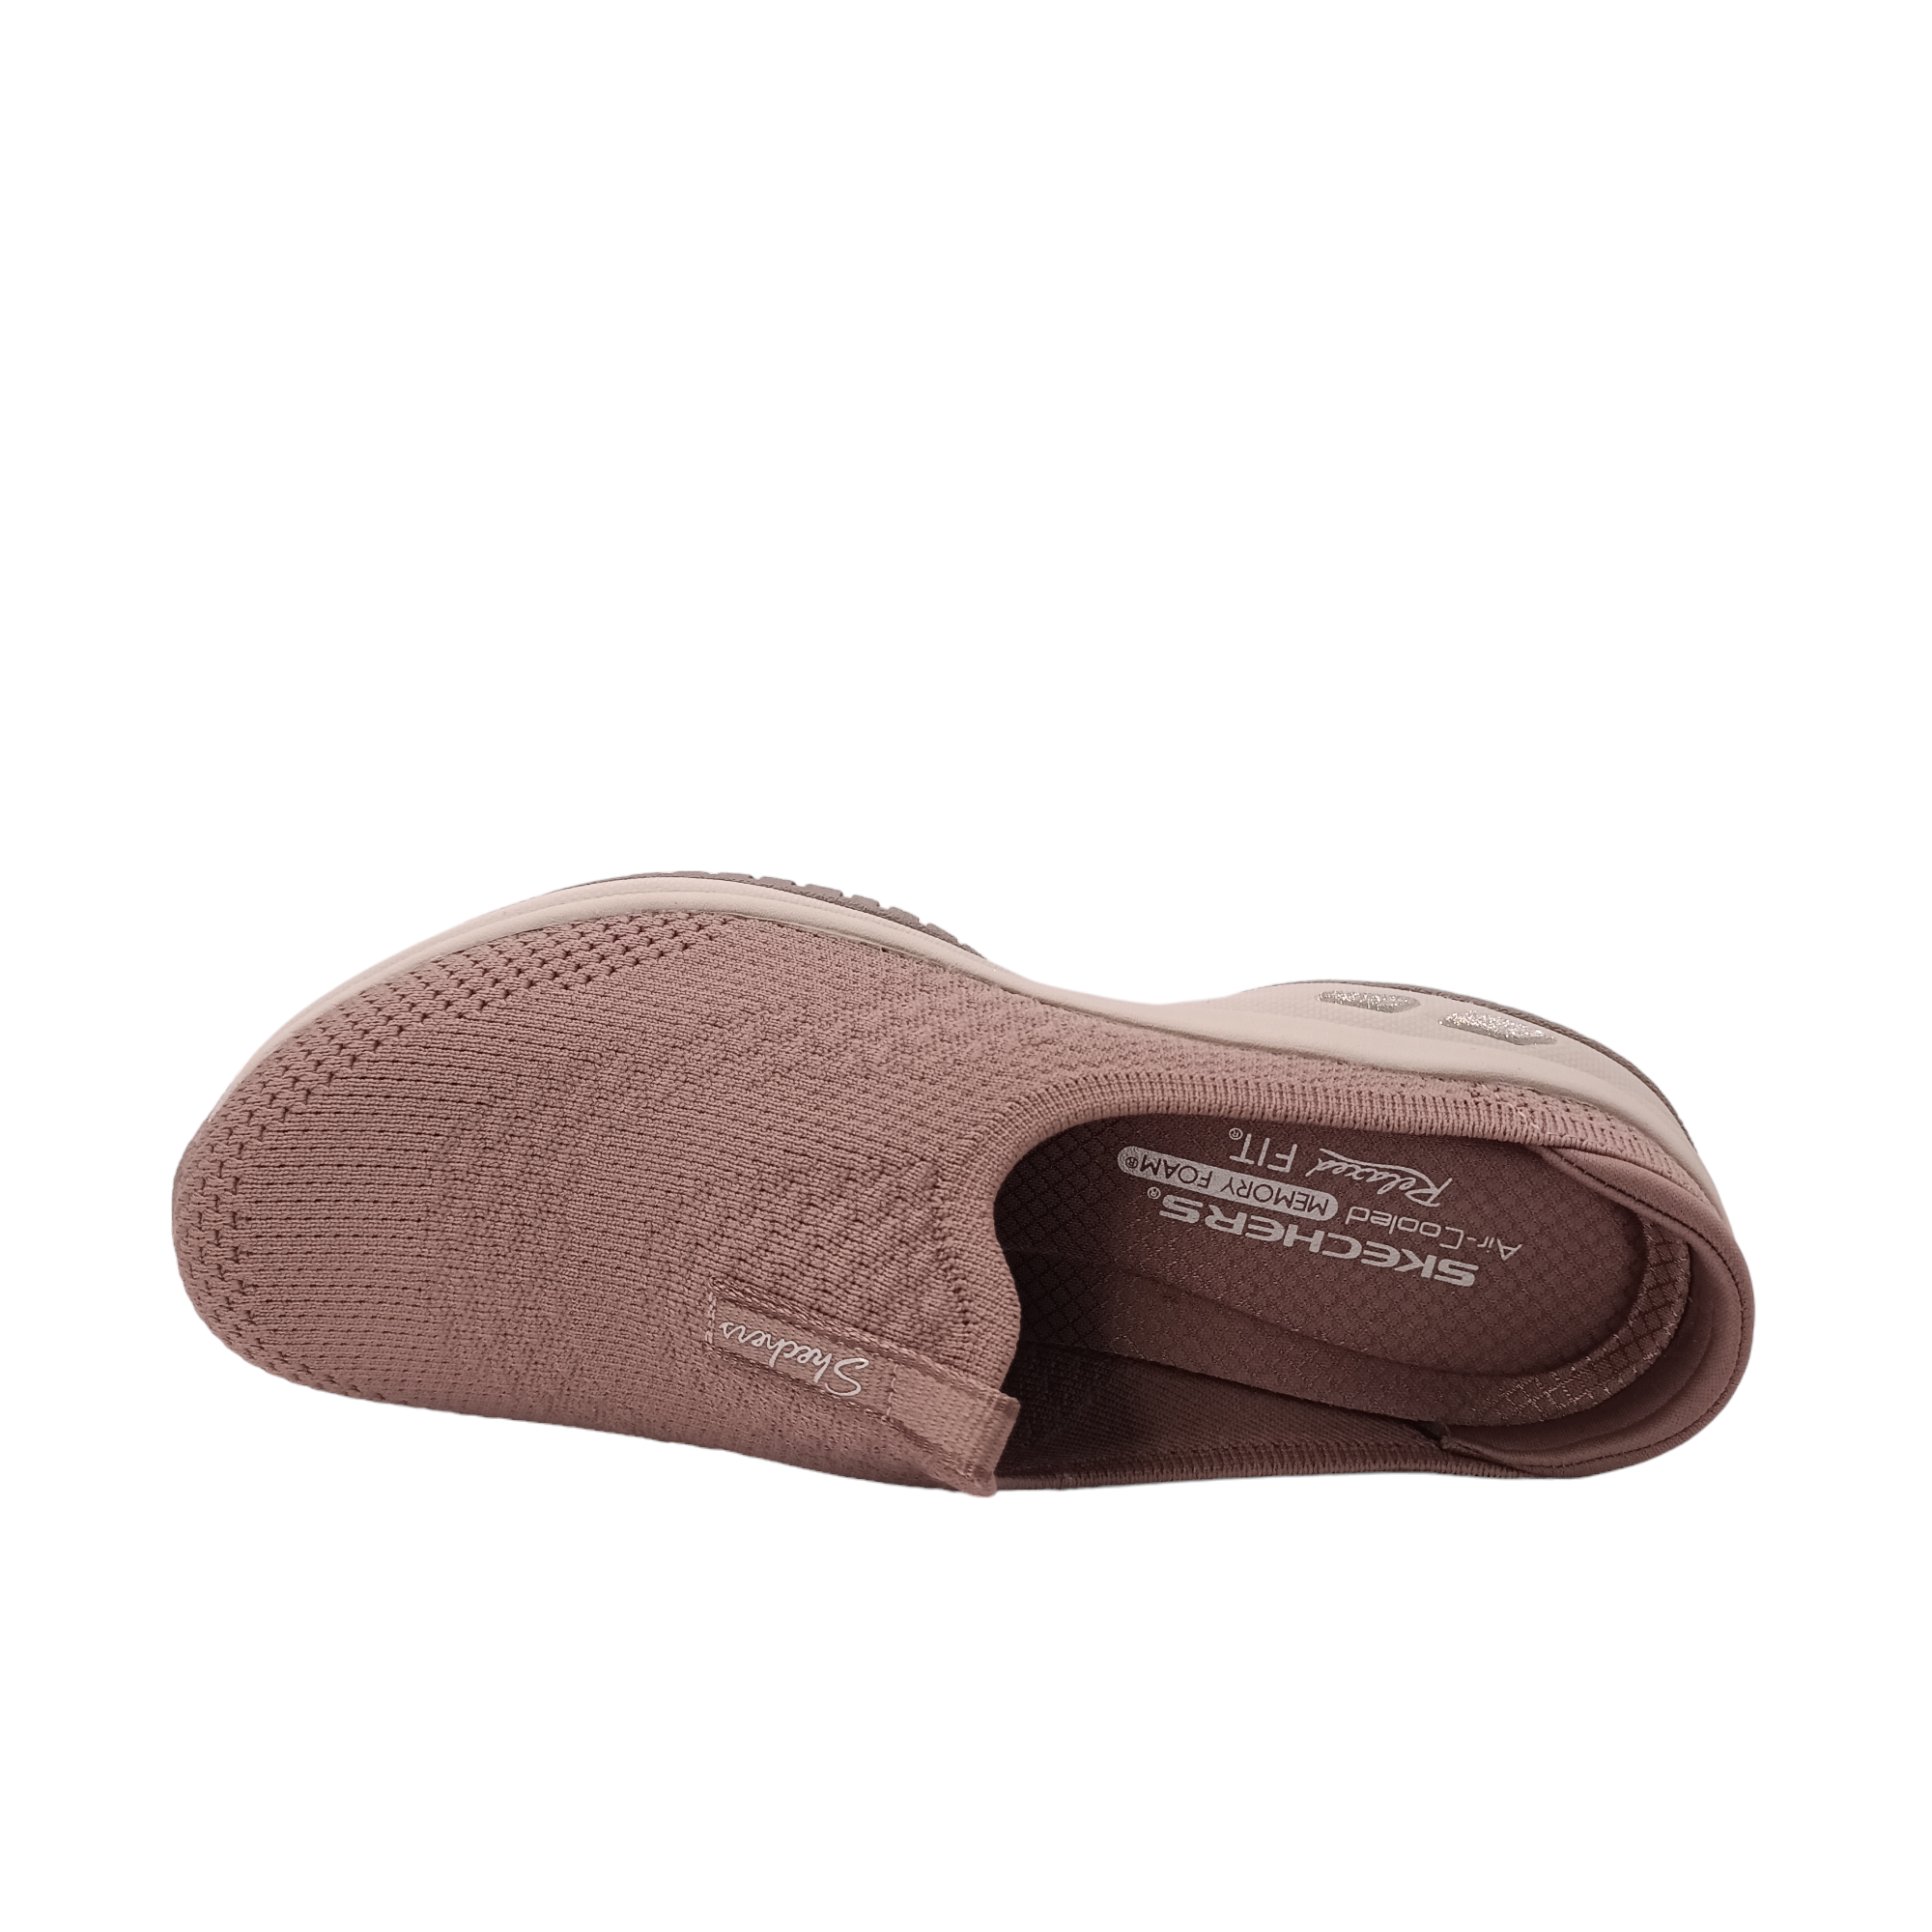 Shop Snuggle Vibes Skechers - with shoe&amp;me - from Skechers - Mules - Slide/Scuff, Winter, Womens - [collection]